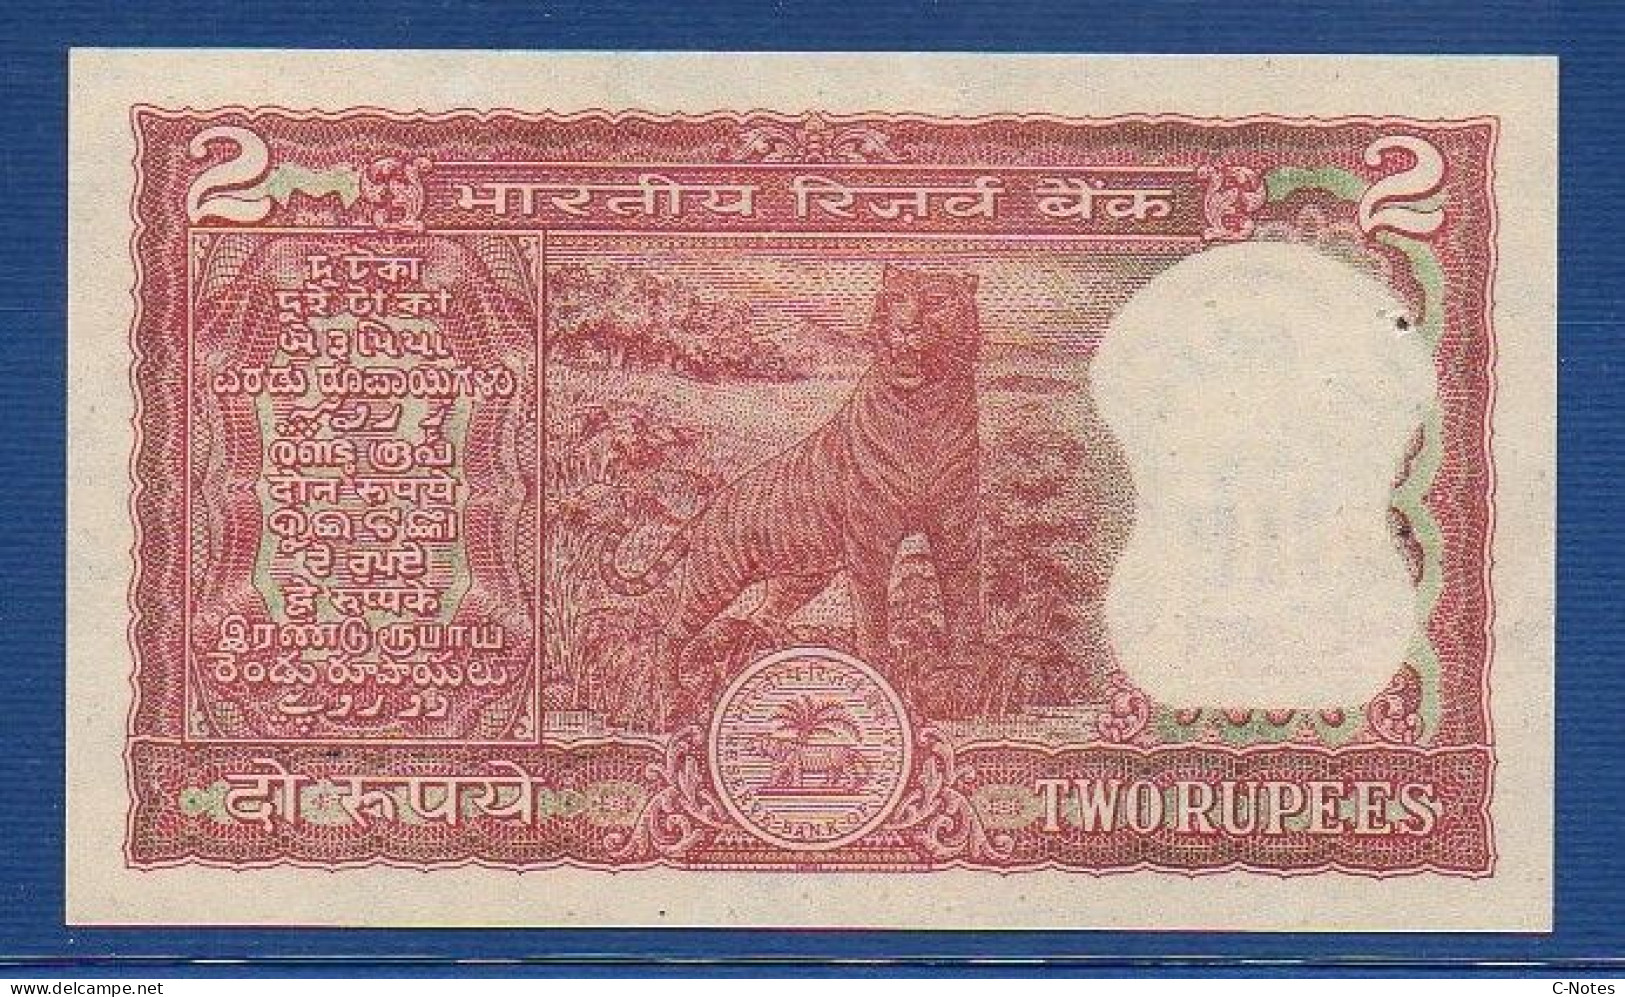 INDIA - P. 53Ac2 – 2 Rupees ND, UNC-,  Serie 58G 046228 - Plate Letter A Signature: Malhotra (1985-1990) - Indien